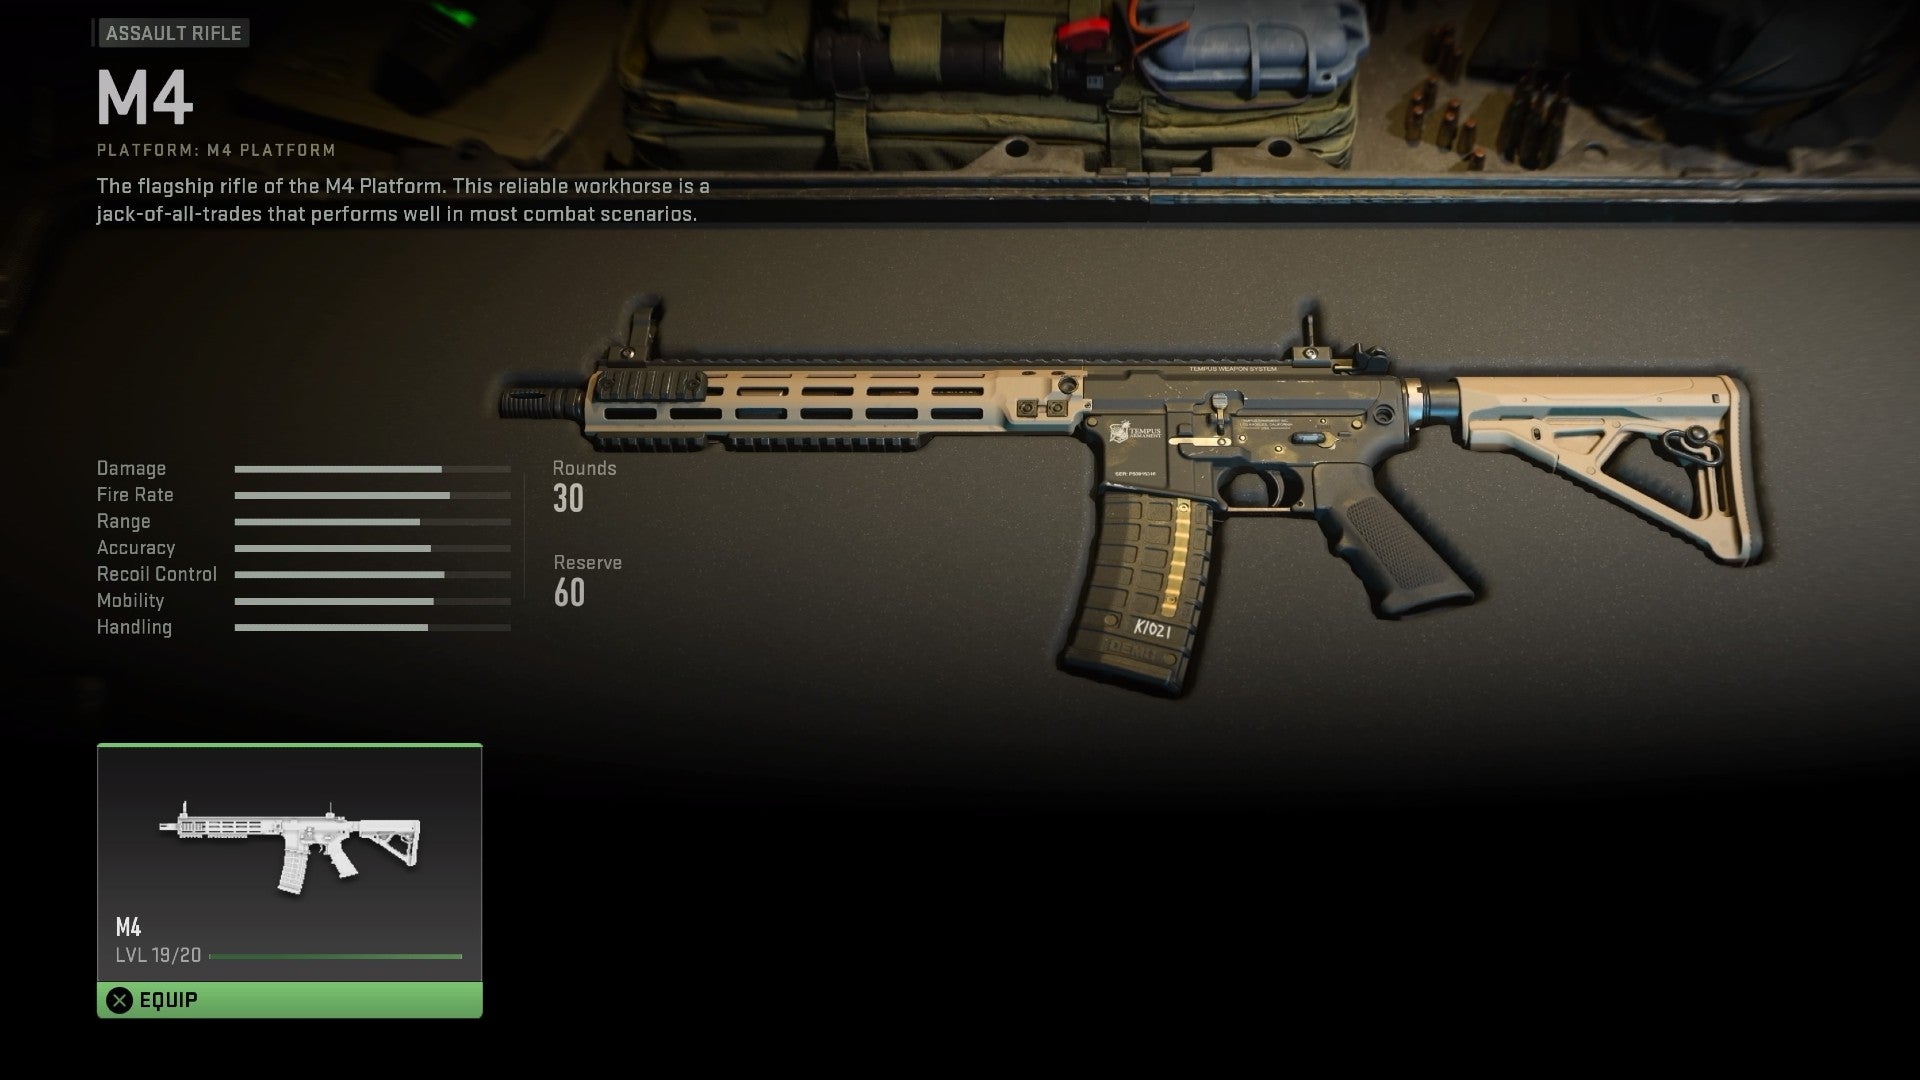 Modern Warfare 2 beta screenshot showing the M4 in a weapon container, with the stats on the left.